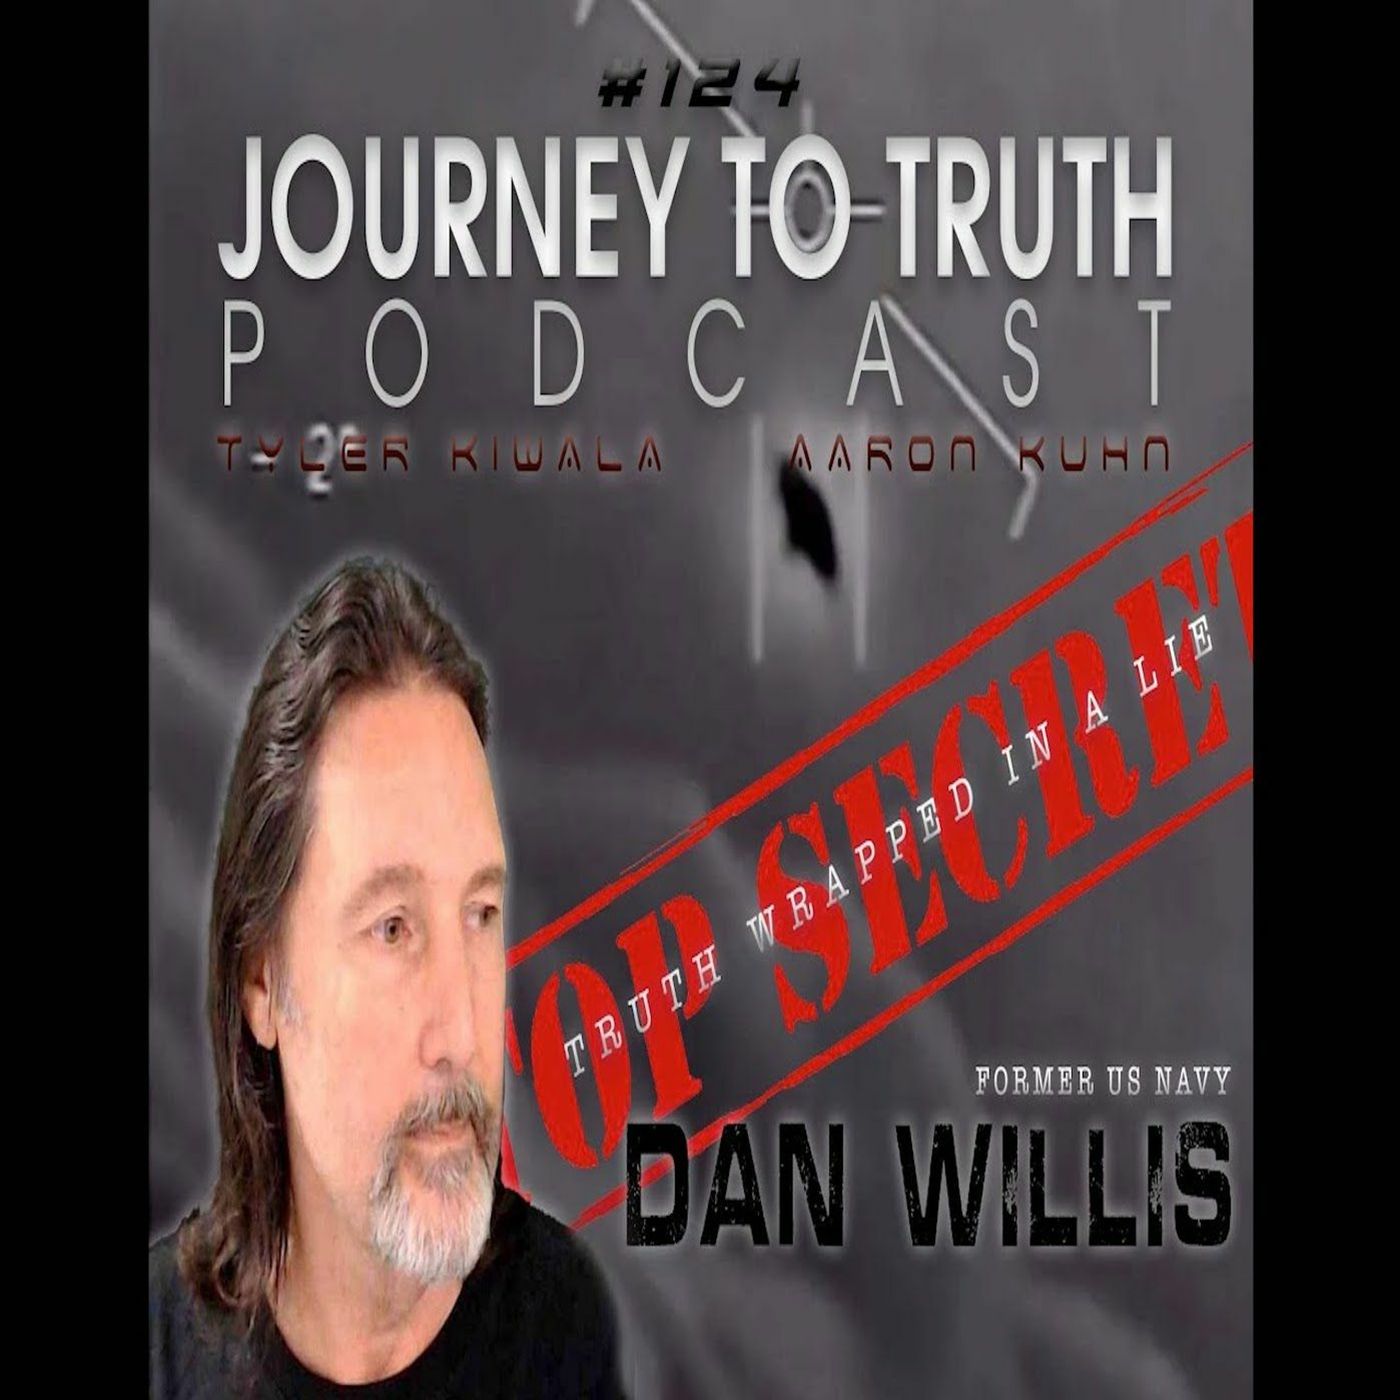 EP 124 - Former US Navy  Dan Willis - Truth Wrapped In A Lie -  We've Been Bamboozled